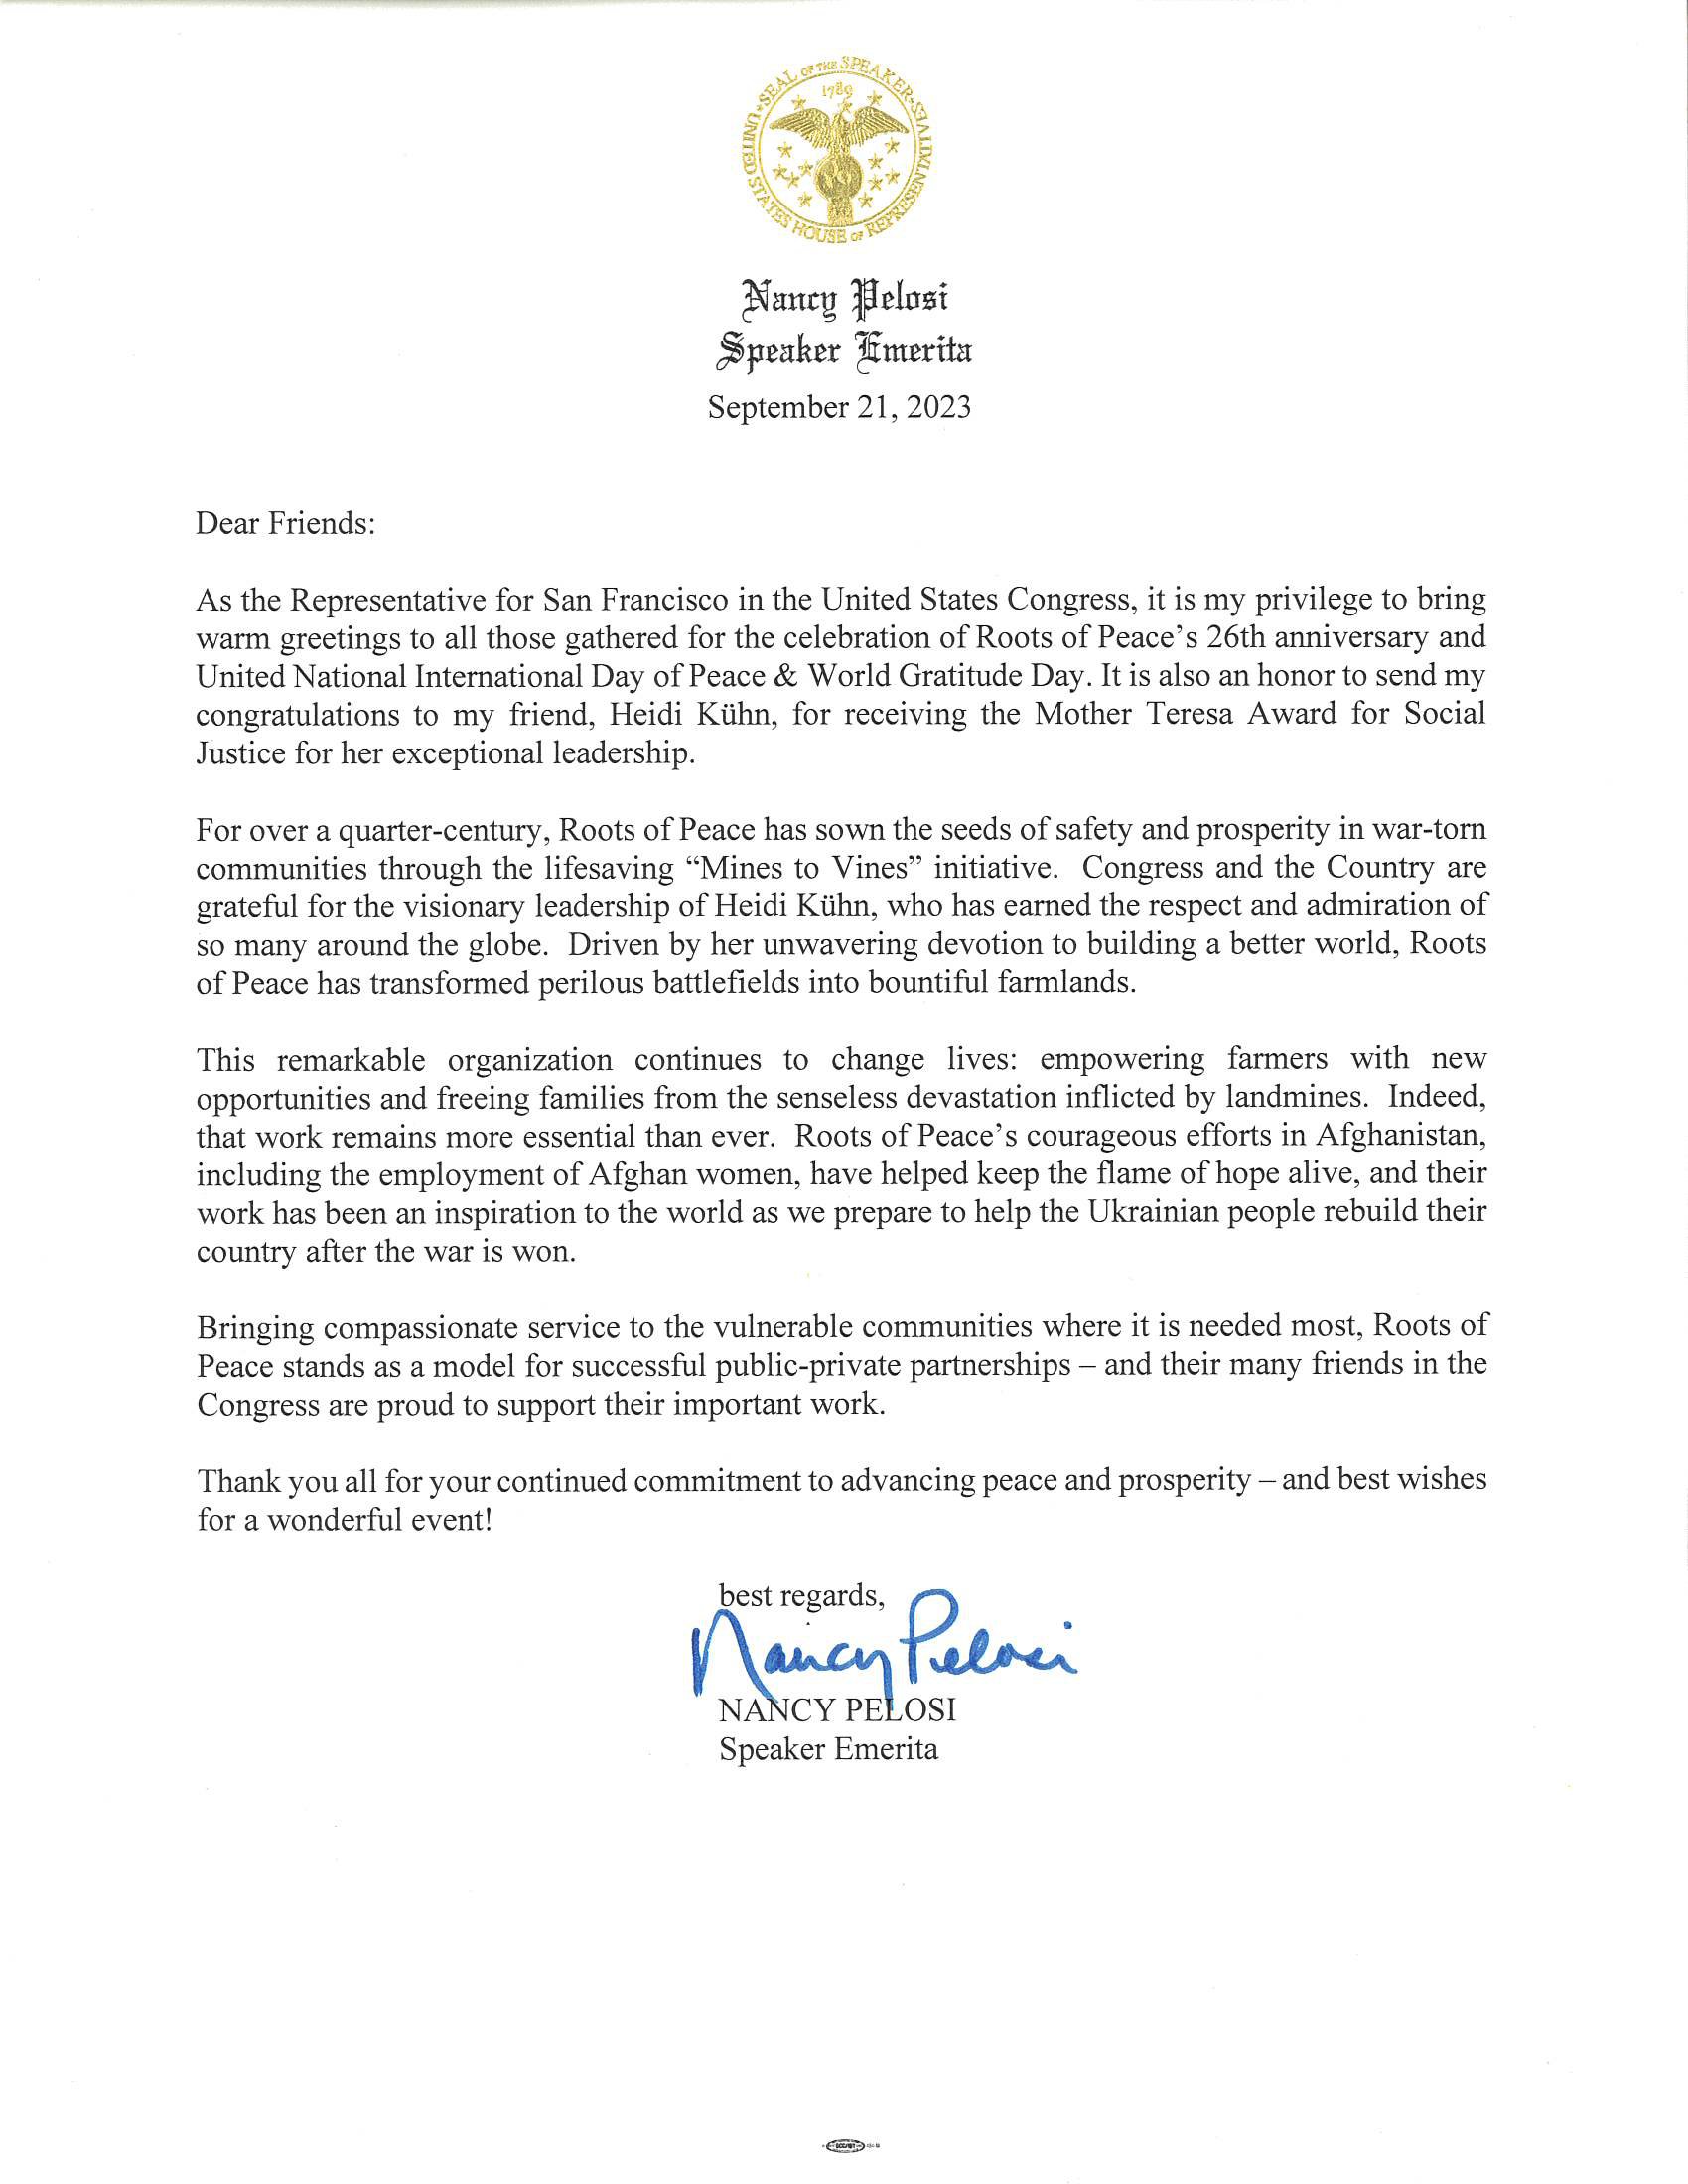 Roots-of-Peace--Pelosi-Letter[42].jpg